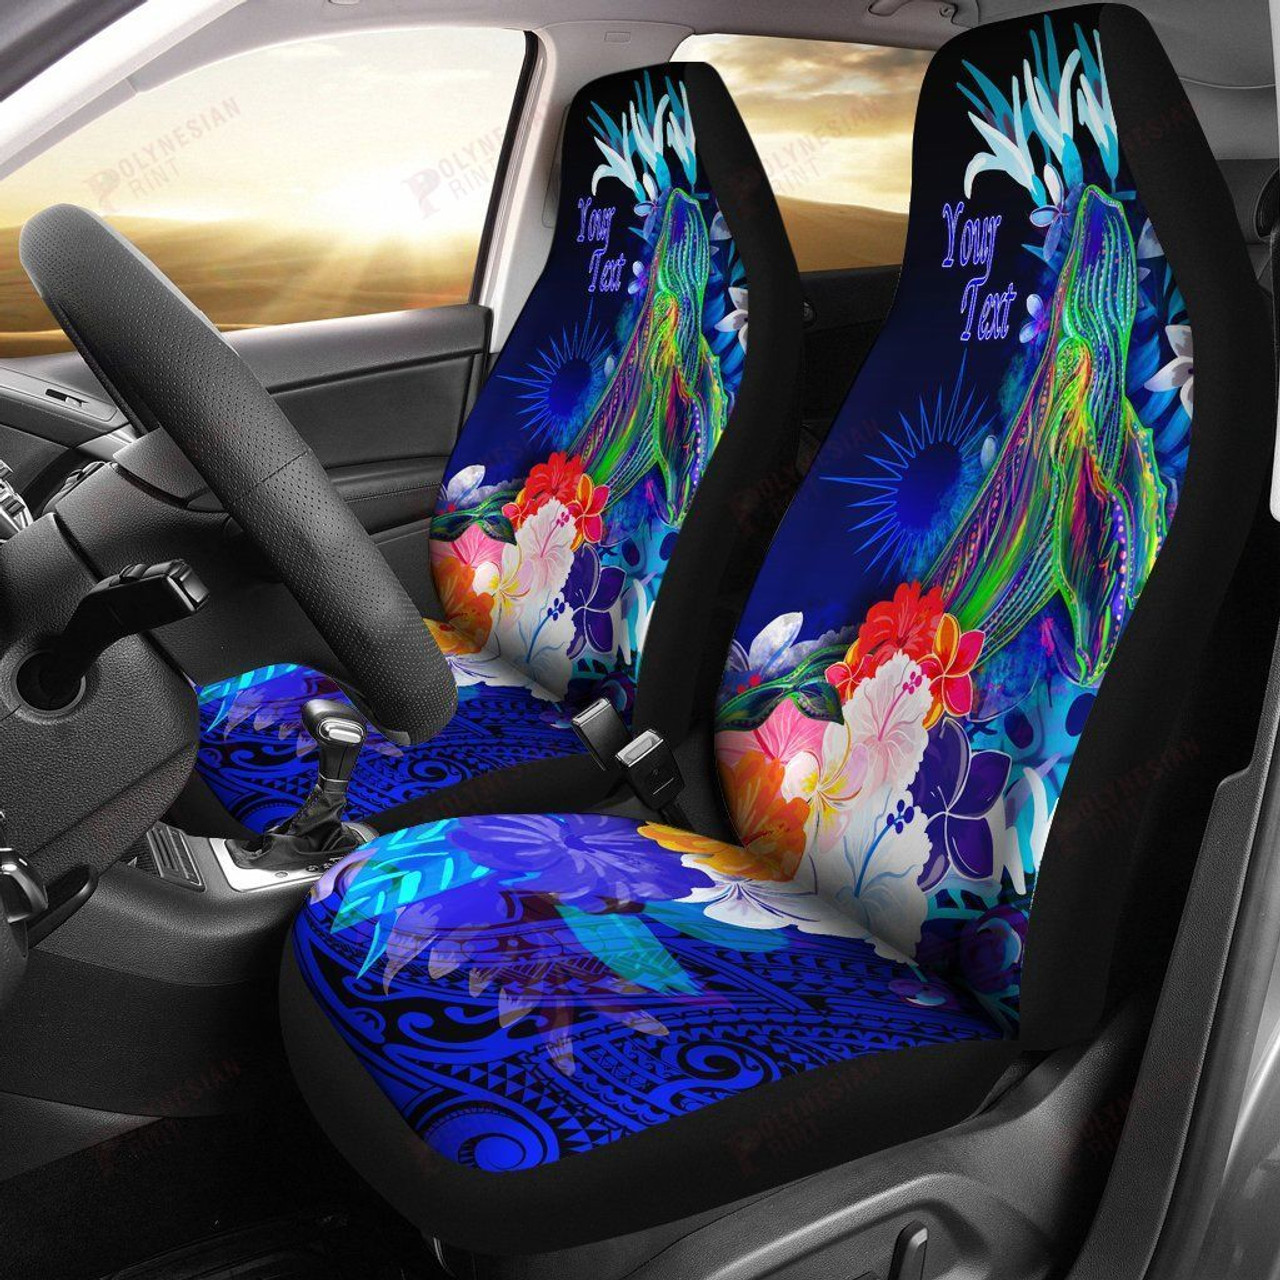 Marshall Islands Custom Personalised Car Seat Covers - Humpback Whale with Tropical Flowers (Blue)